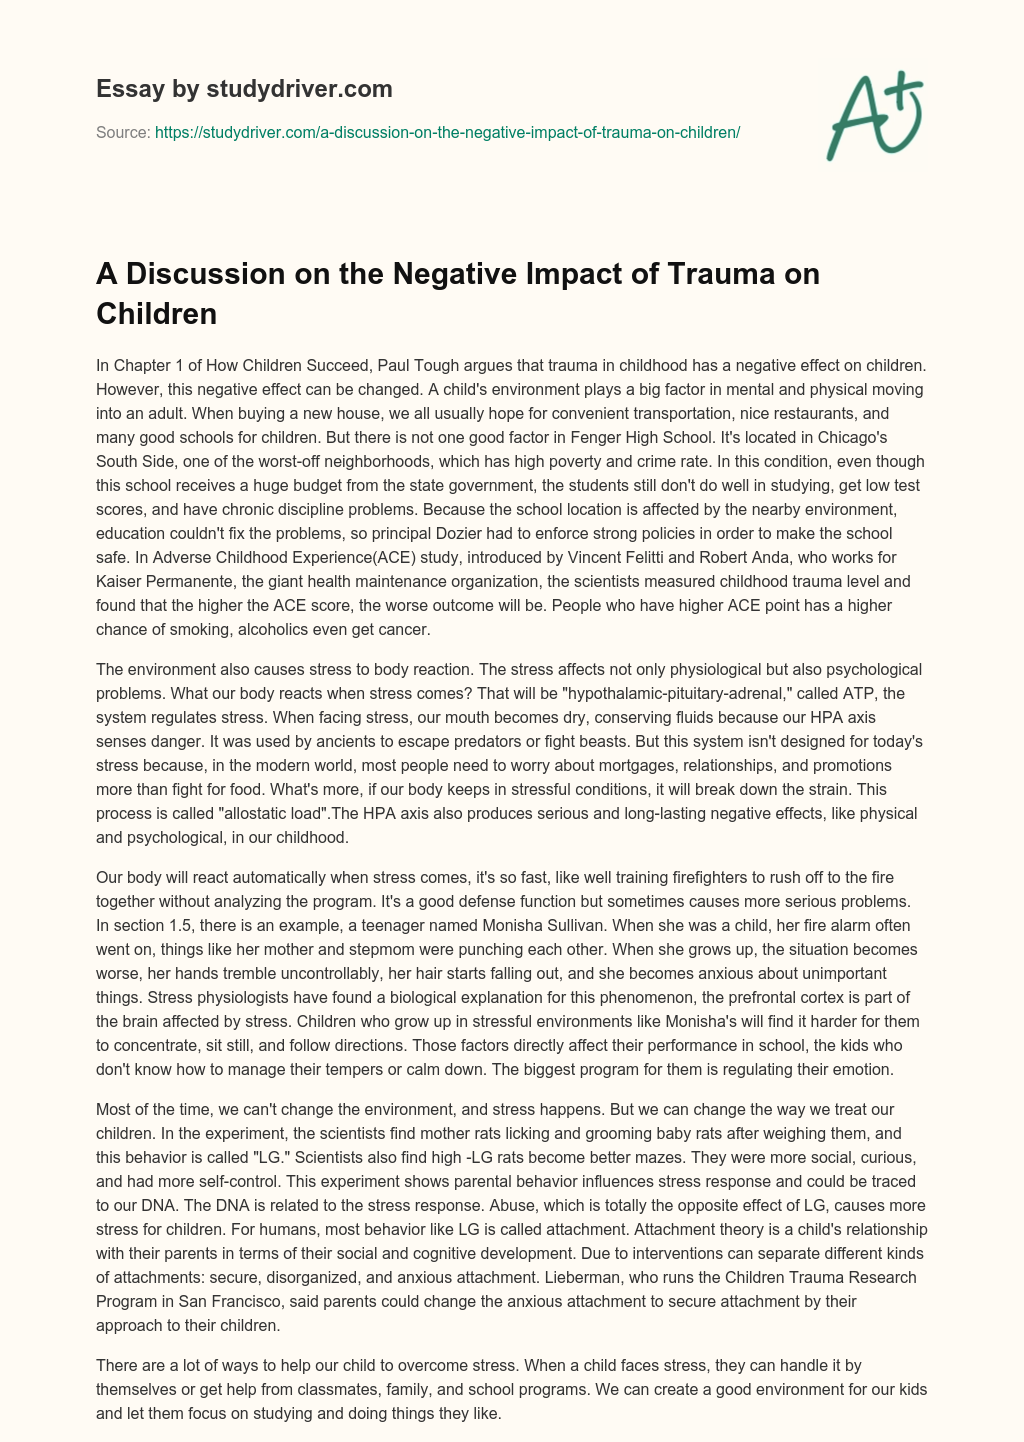 A Discussion on the Negative Impact of Trauma on Children essay